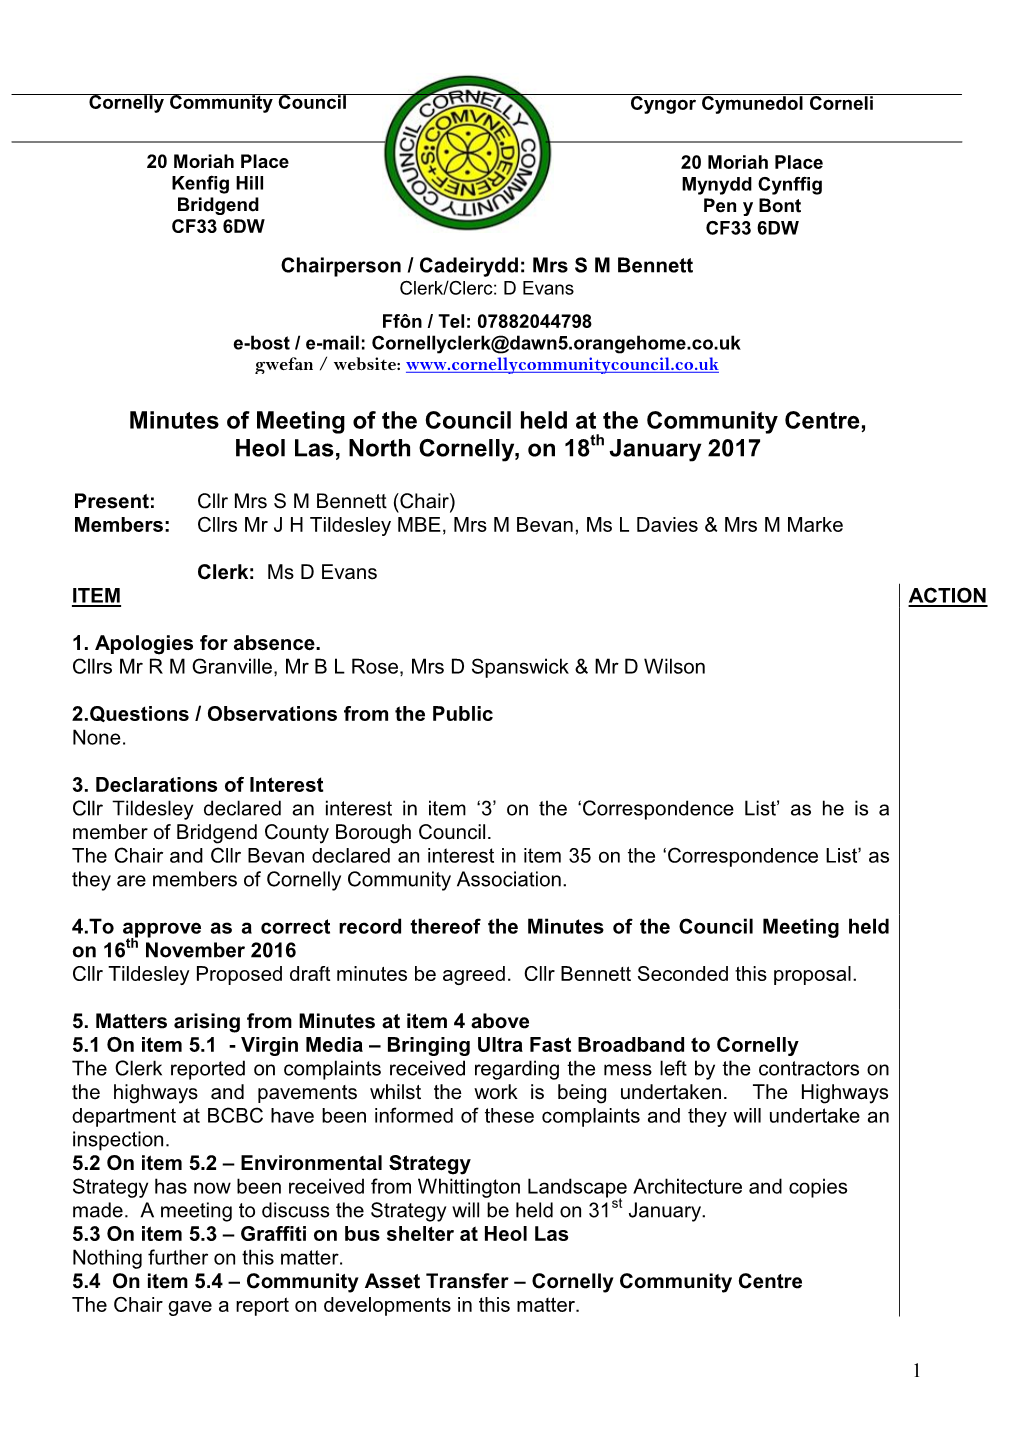 Minutes of Meeting of the Council Held at the Community Centre, Heol Las, North Cornelly, on 18Th January 2017